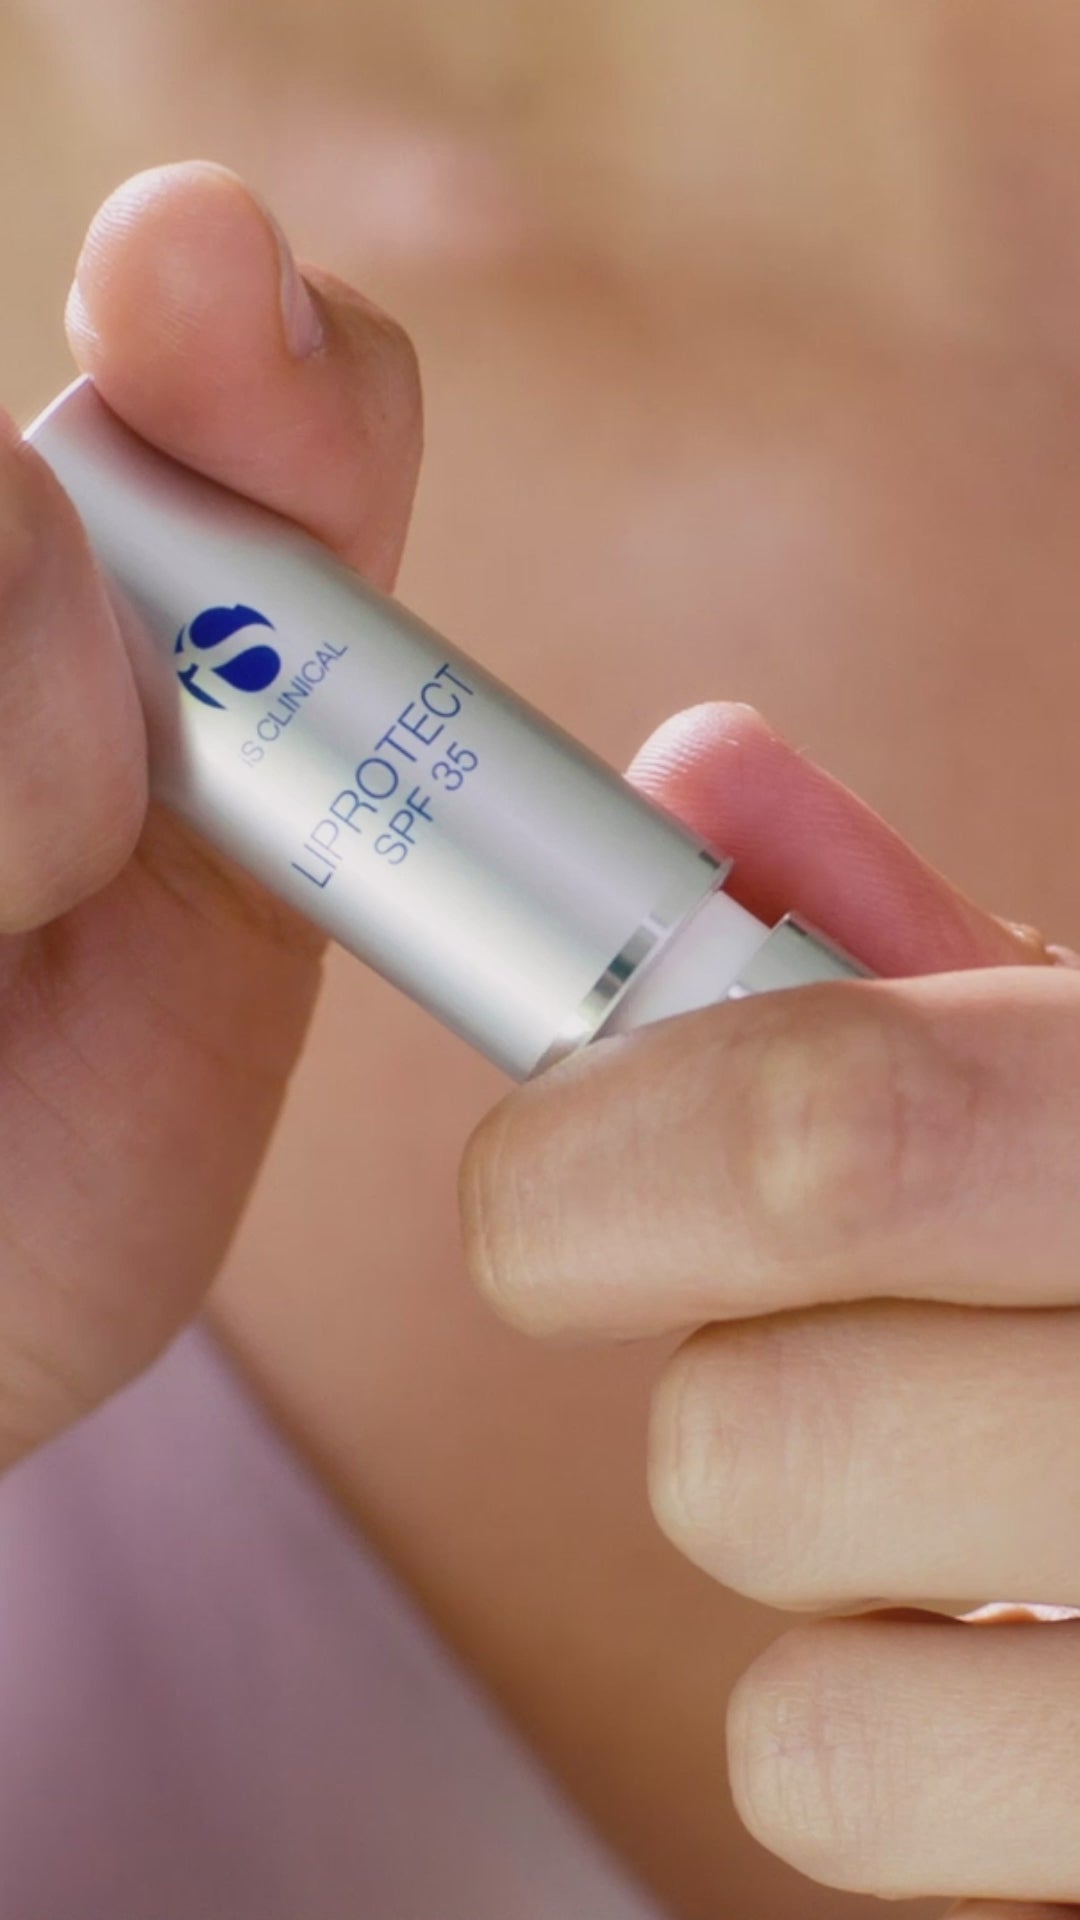 iS Clinical LIProtect SPF 35 (0.17 once)